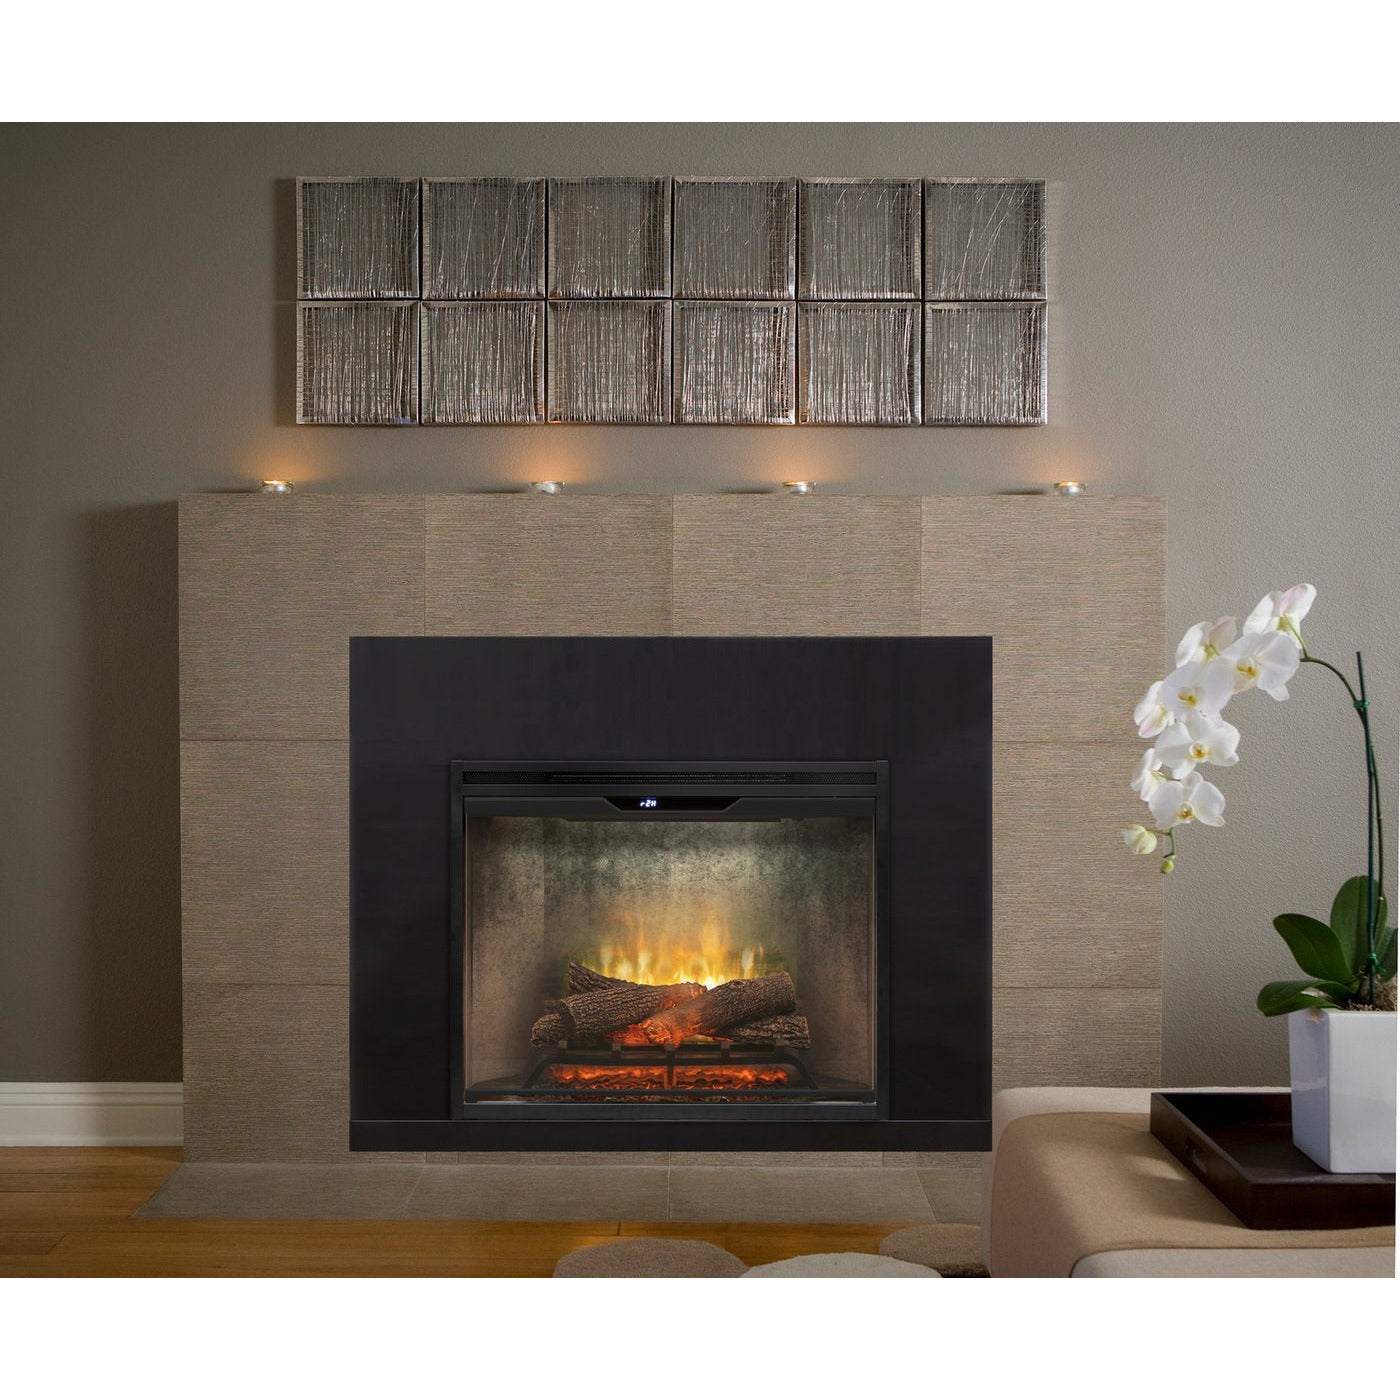 Dimplex 30" Revillusion Electric Built-In Firebox Weathered Concrete 500002389